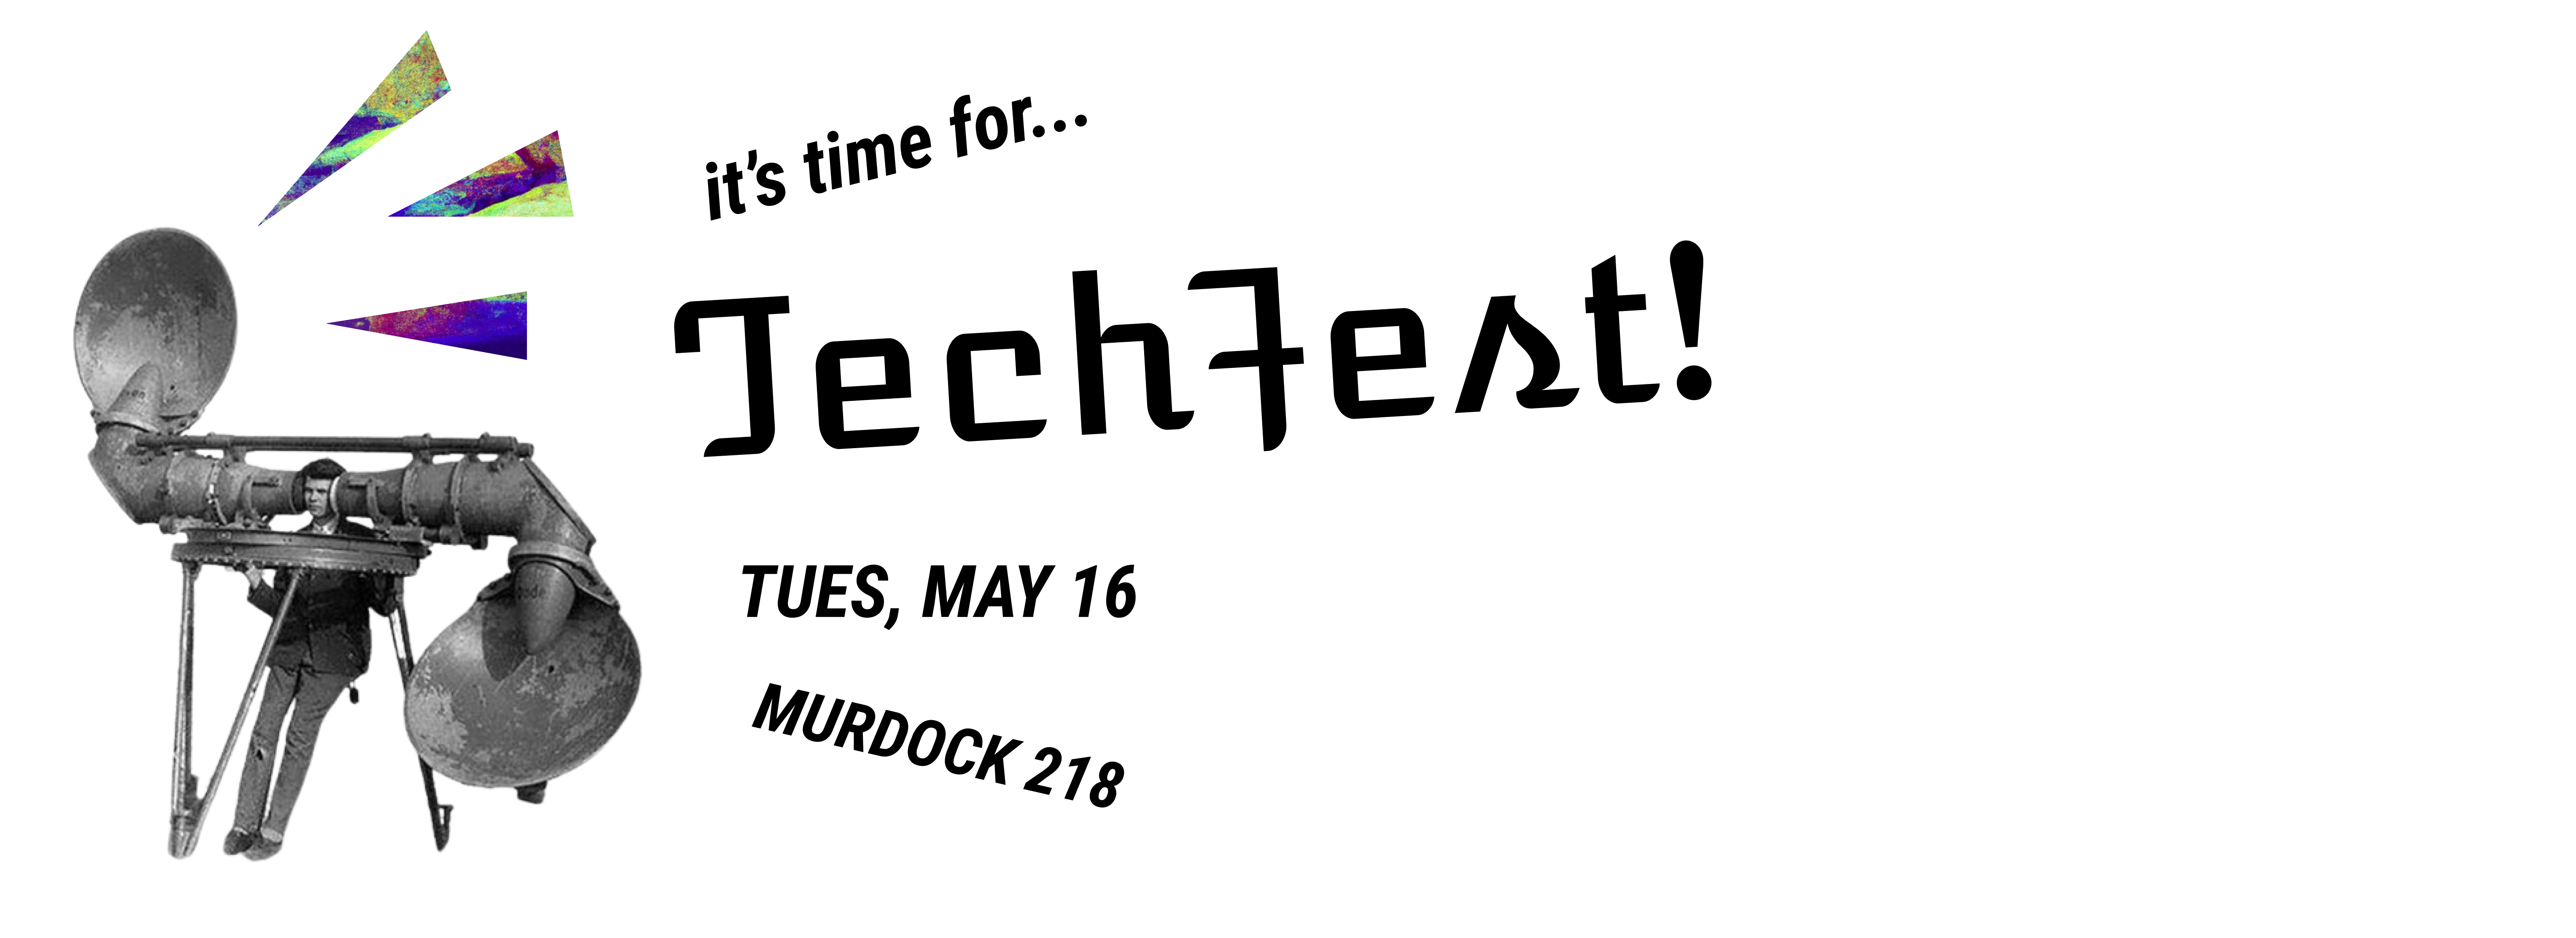 It's time for... Tech Fest! Tues, May 16 in Murdock 218